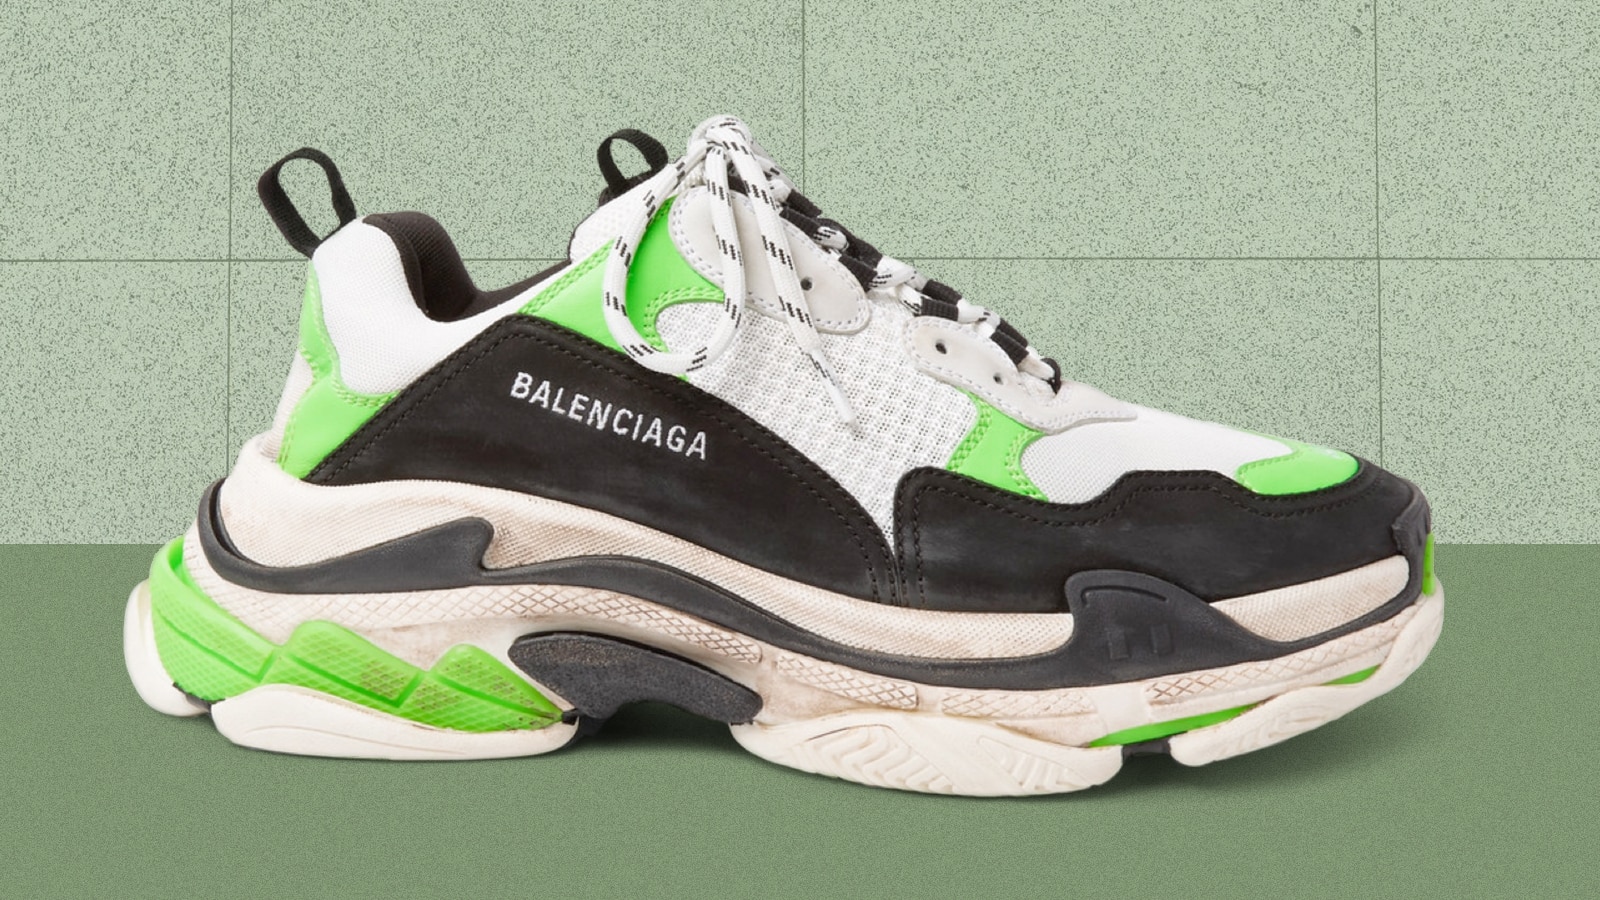 Why Balenciaga's Triple S Sneaker Is A Work Of Art | The Journal | MR PORTER